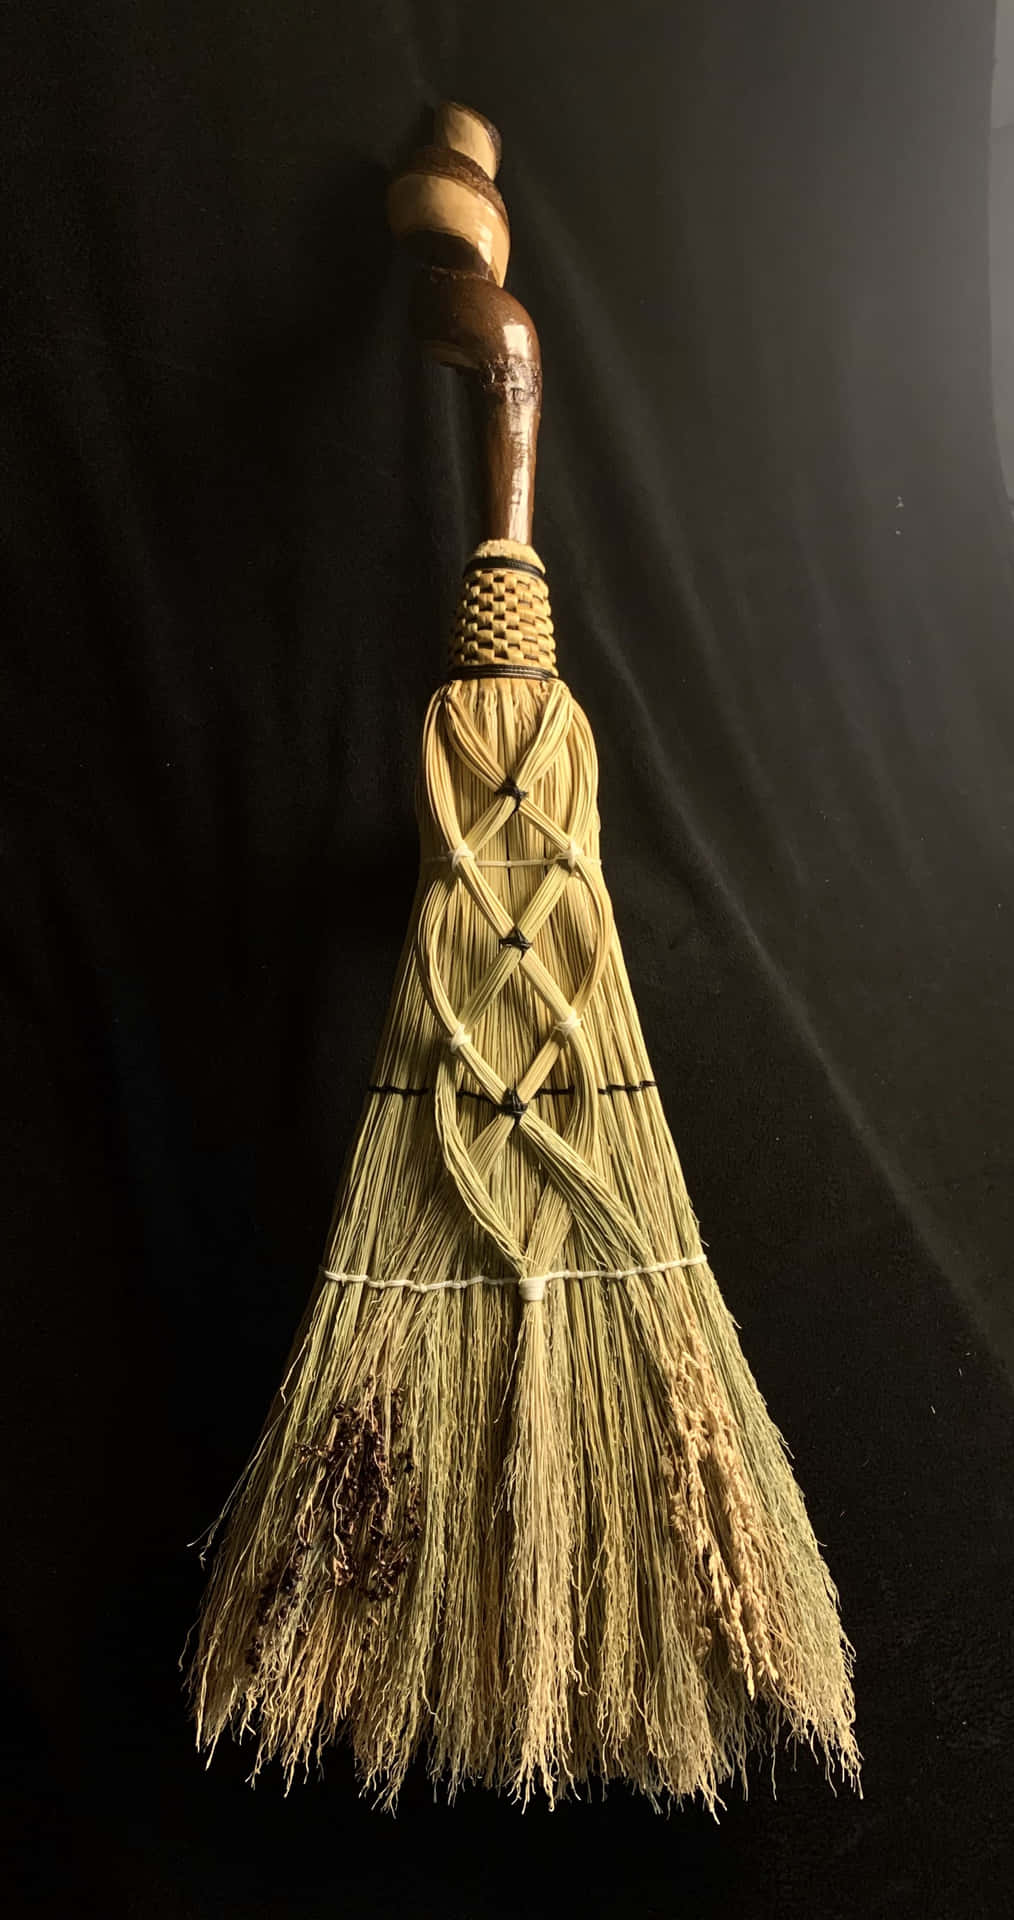 A Broom With A Wooden Handle And A Wooden Handle